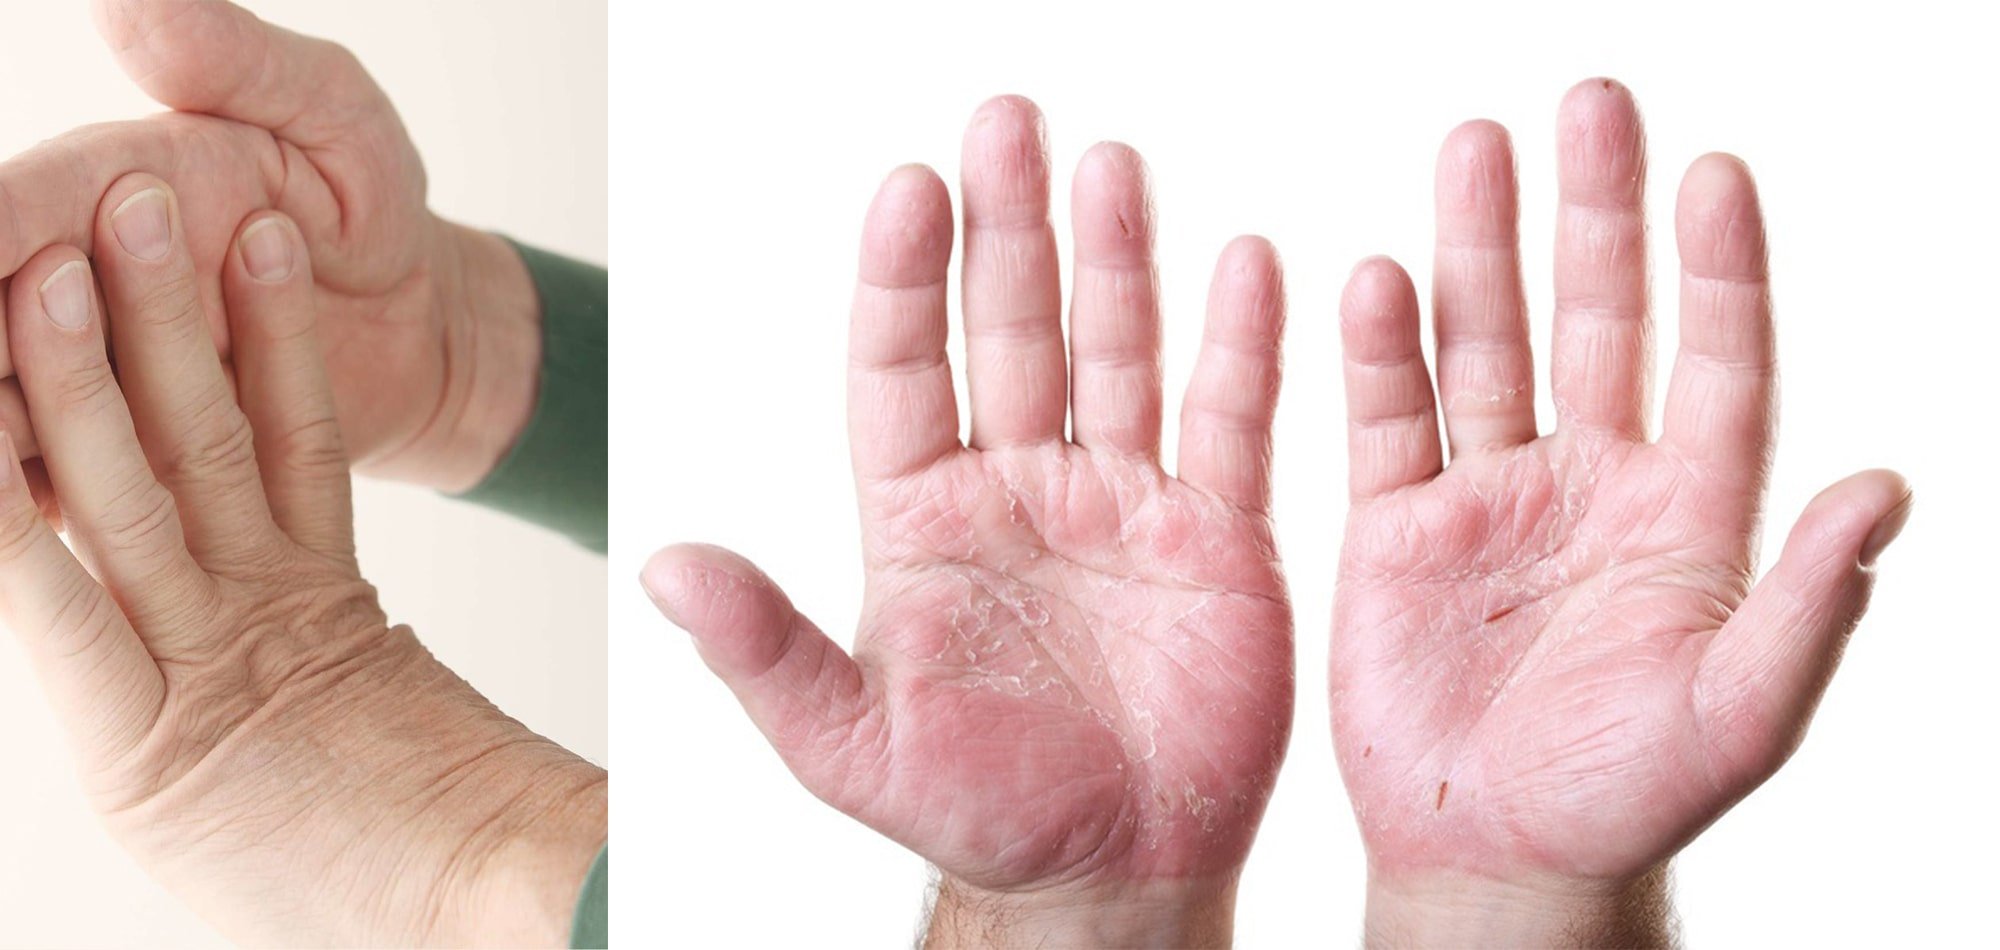 Know More About Psoriasis Disease, Eczema, Fungal Infection